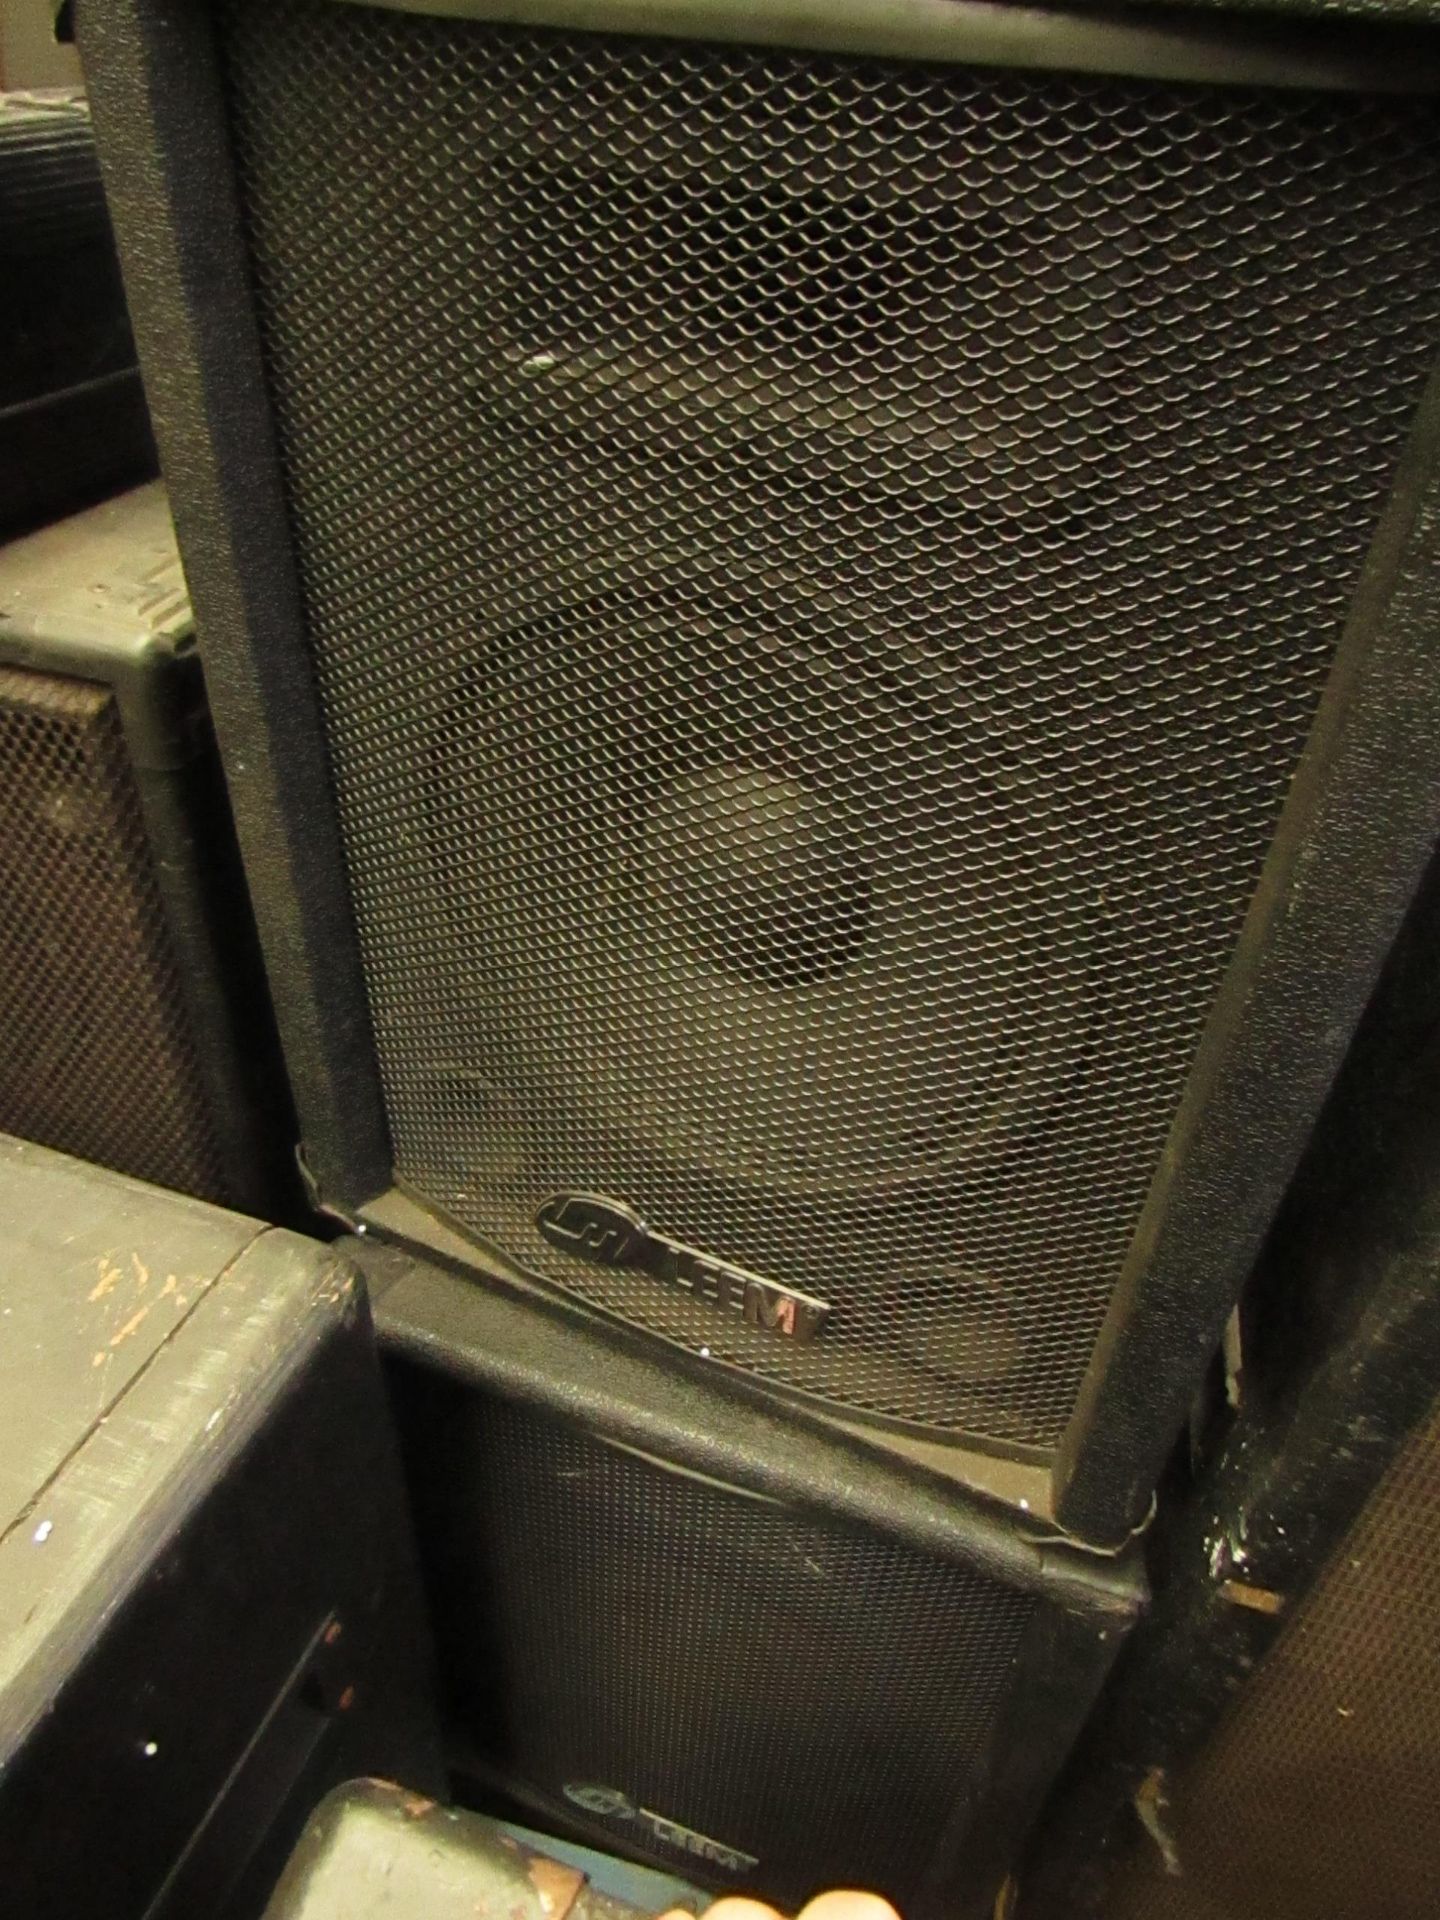 Set of 2 Leem Stage Speakers, completely unchecked and comes as units only no cables